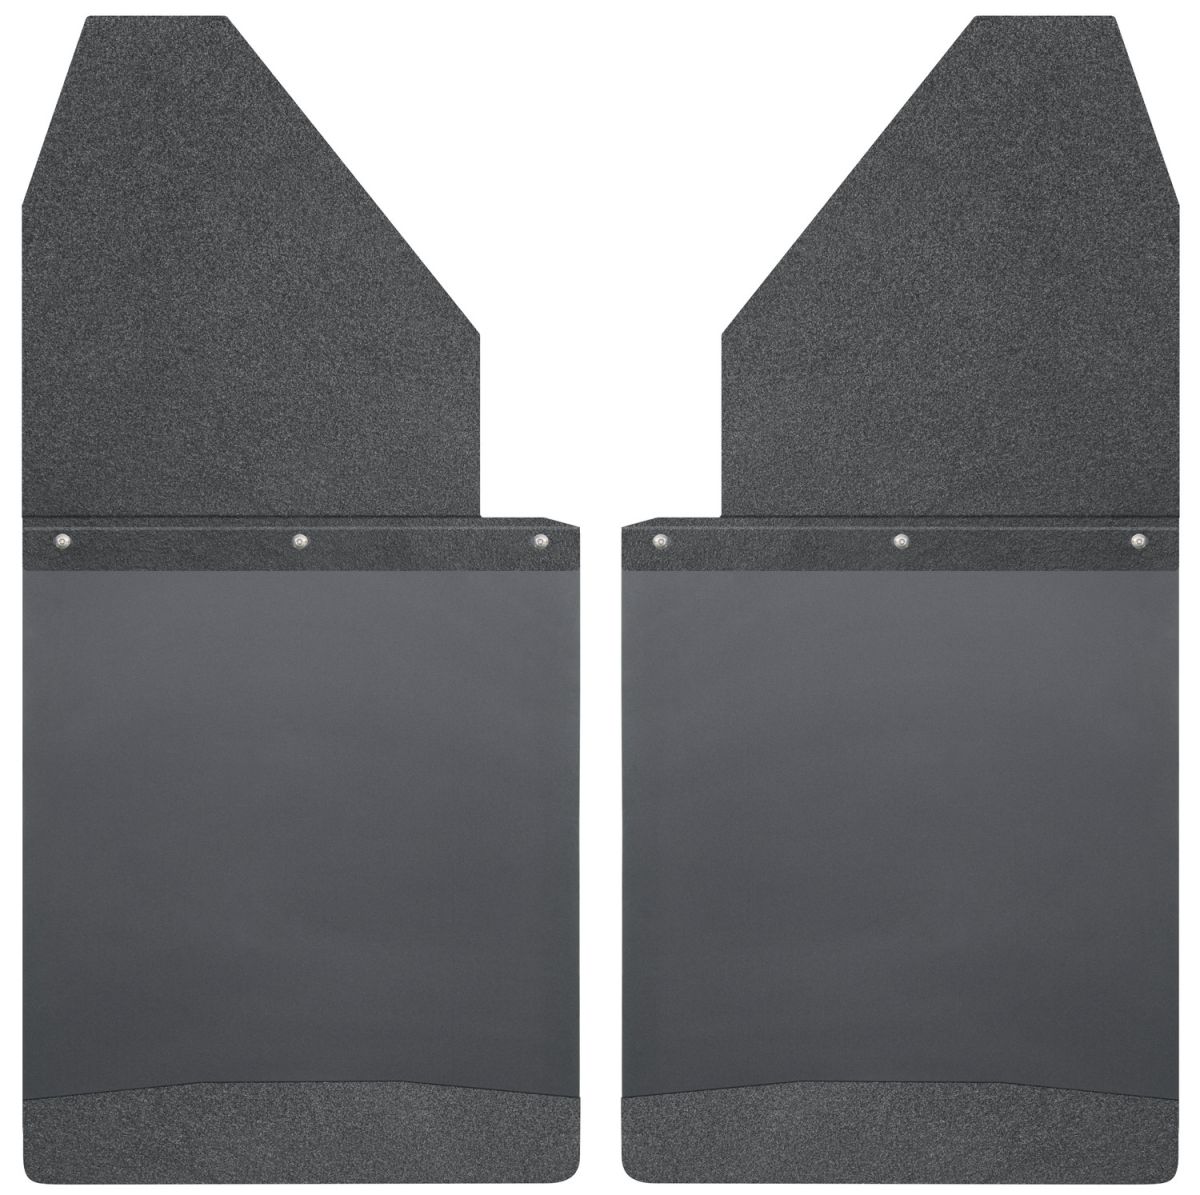 Husky Liners - Husky Liners Kick Back Mud Flaps 14" Wide Black Top and Black Weight Universal Fit 17112